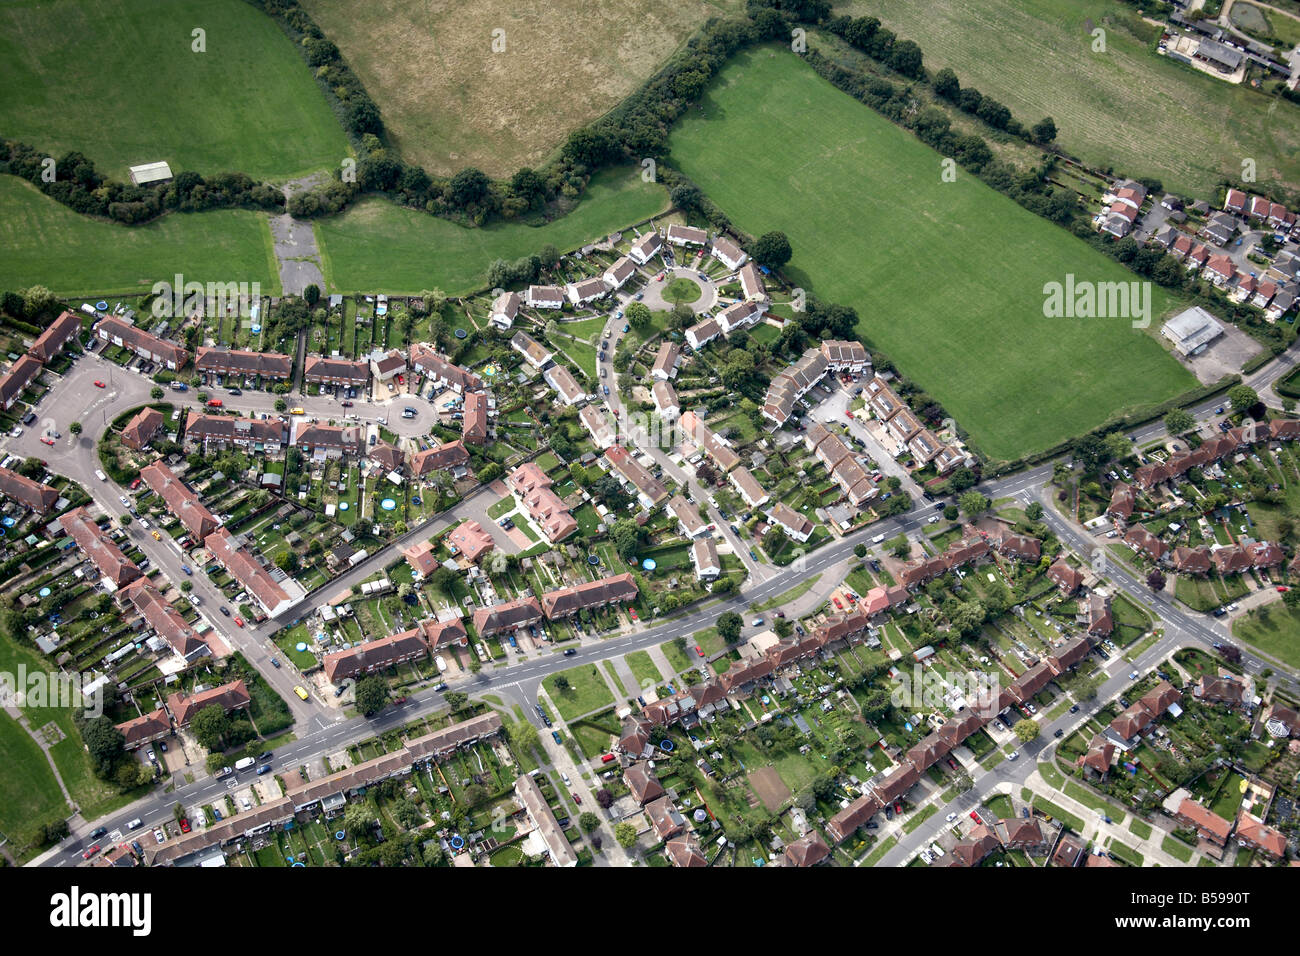 Aerial view north west of suburban housing development country fields Oakleigh Park Barnet Greater London N20 England UK Stock Photo